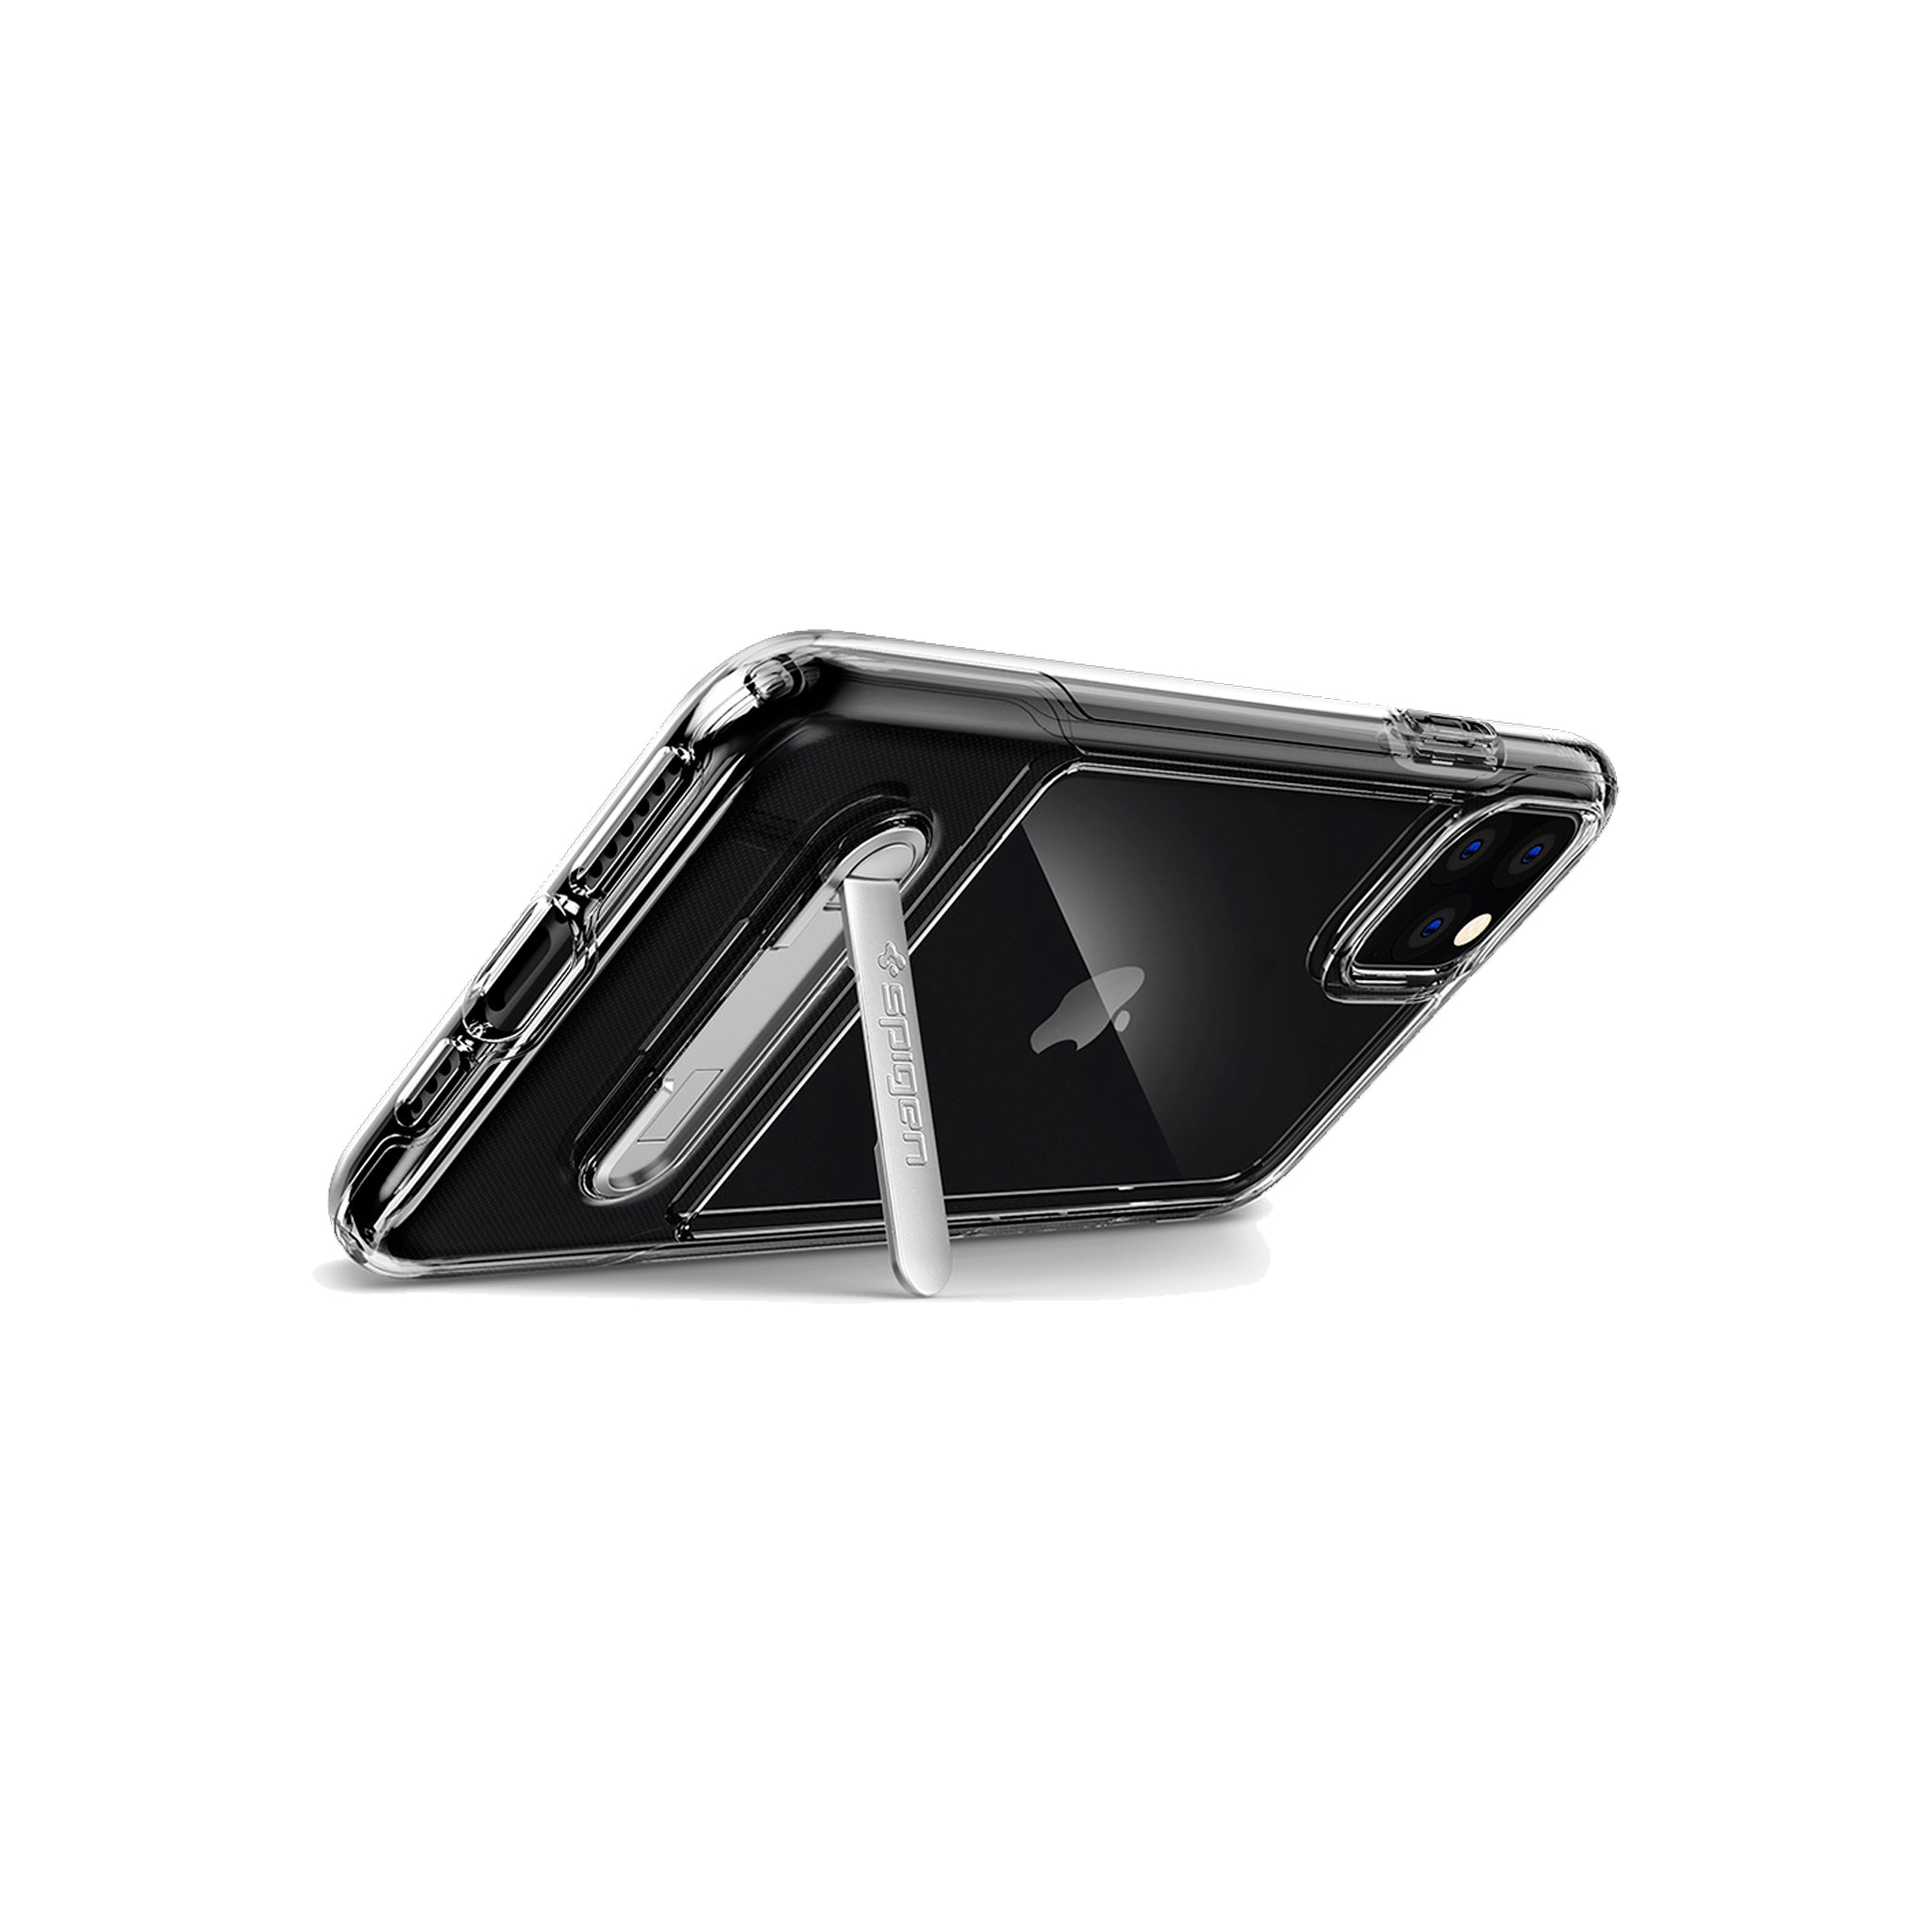 Spigen - Slim Armor Essential S Case For Apple Iphone 11 Pro - Crystal Clear